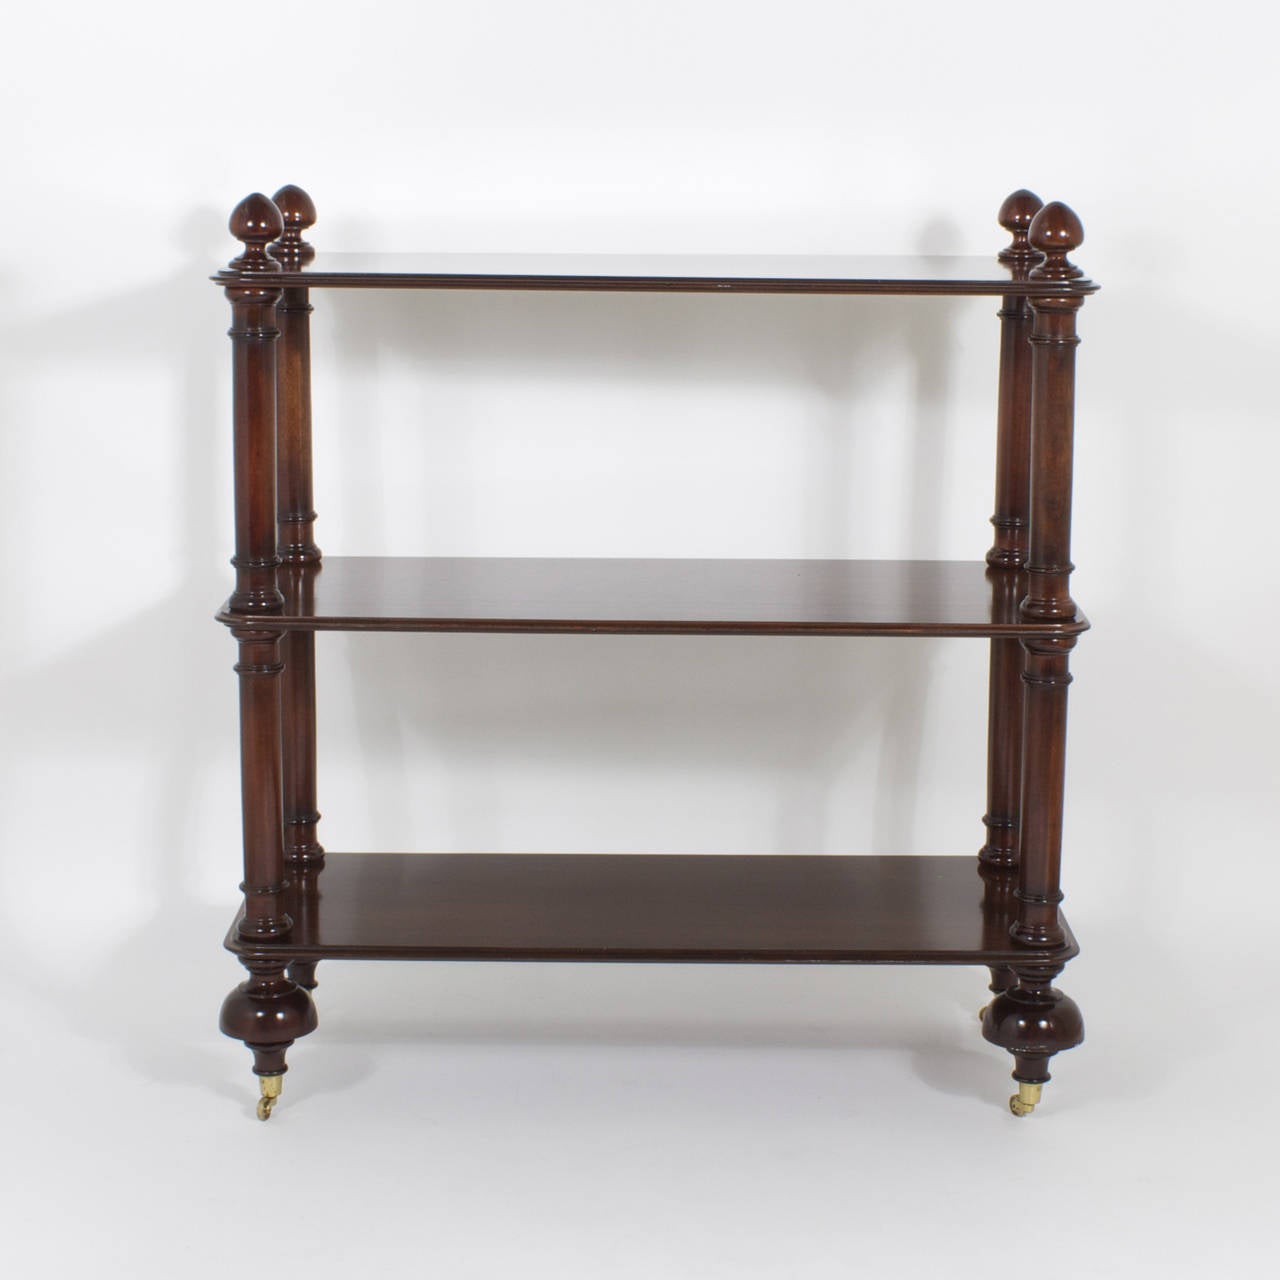 Three-Tiered Mahogany Set of Shelves or Étagerè In Good Condition For Sale In Palm Beach, FL